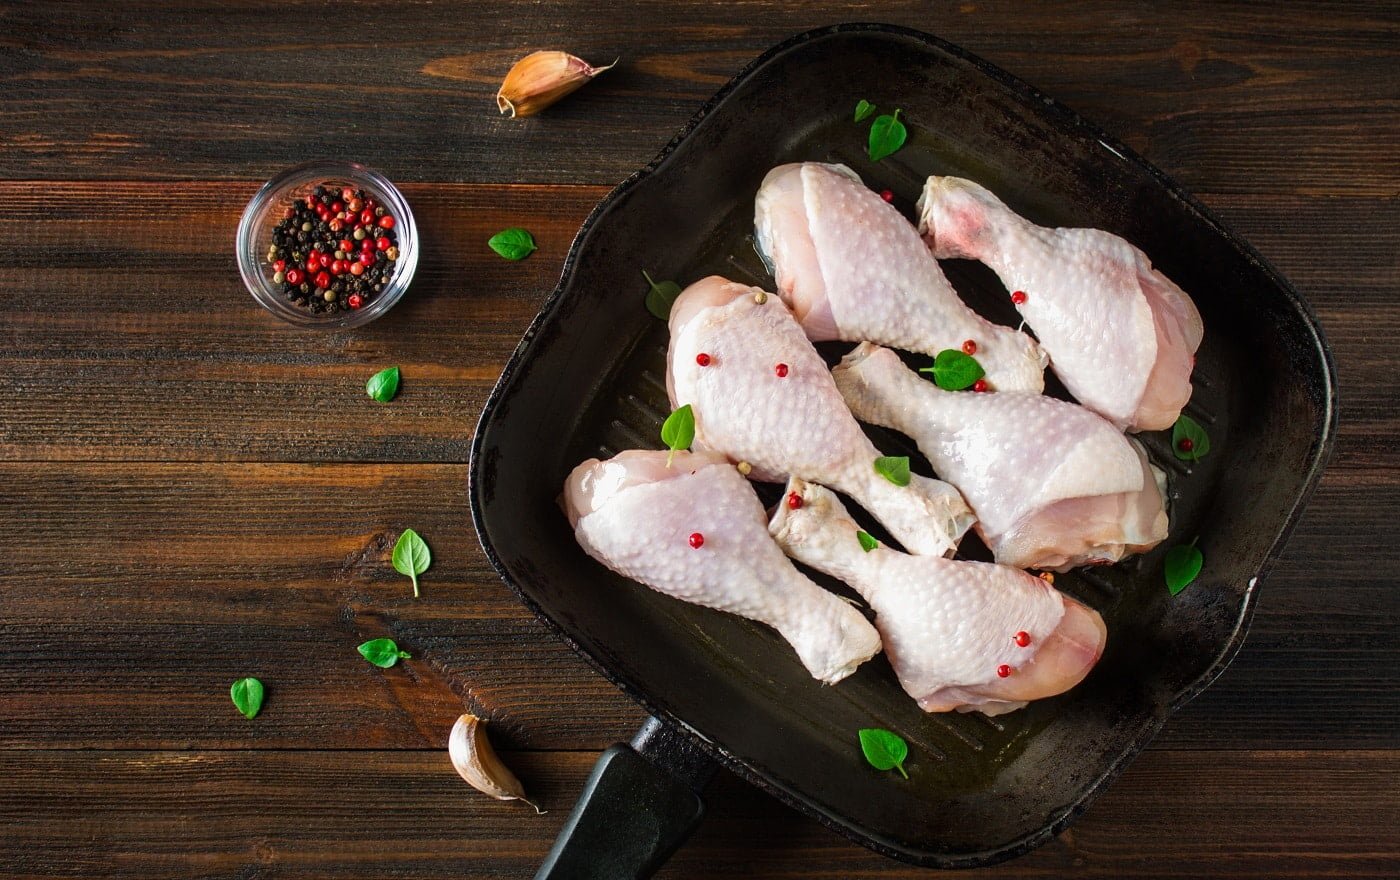 Raw chicken legs in a frying pan on a wooden table. Meat ingredients for cooking. Top view. Closeup.